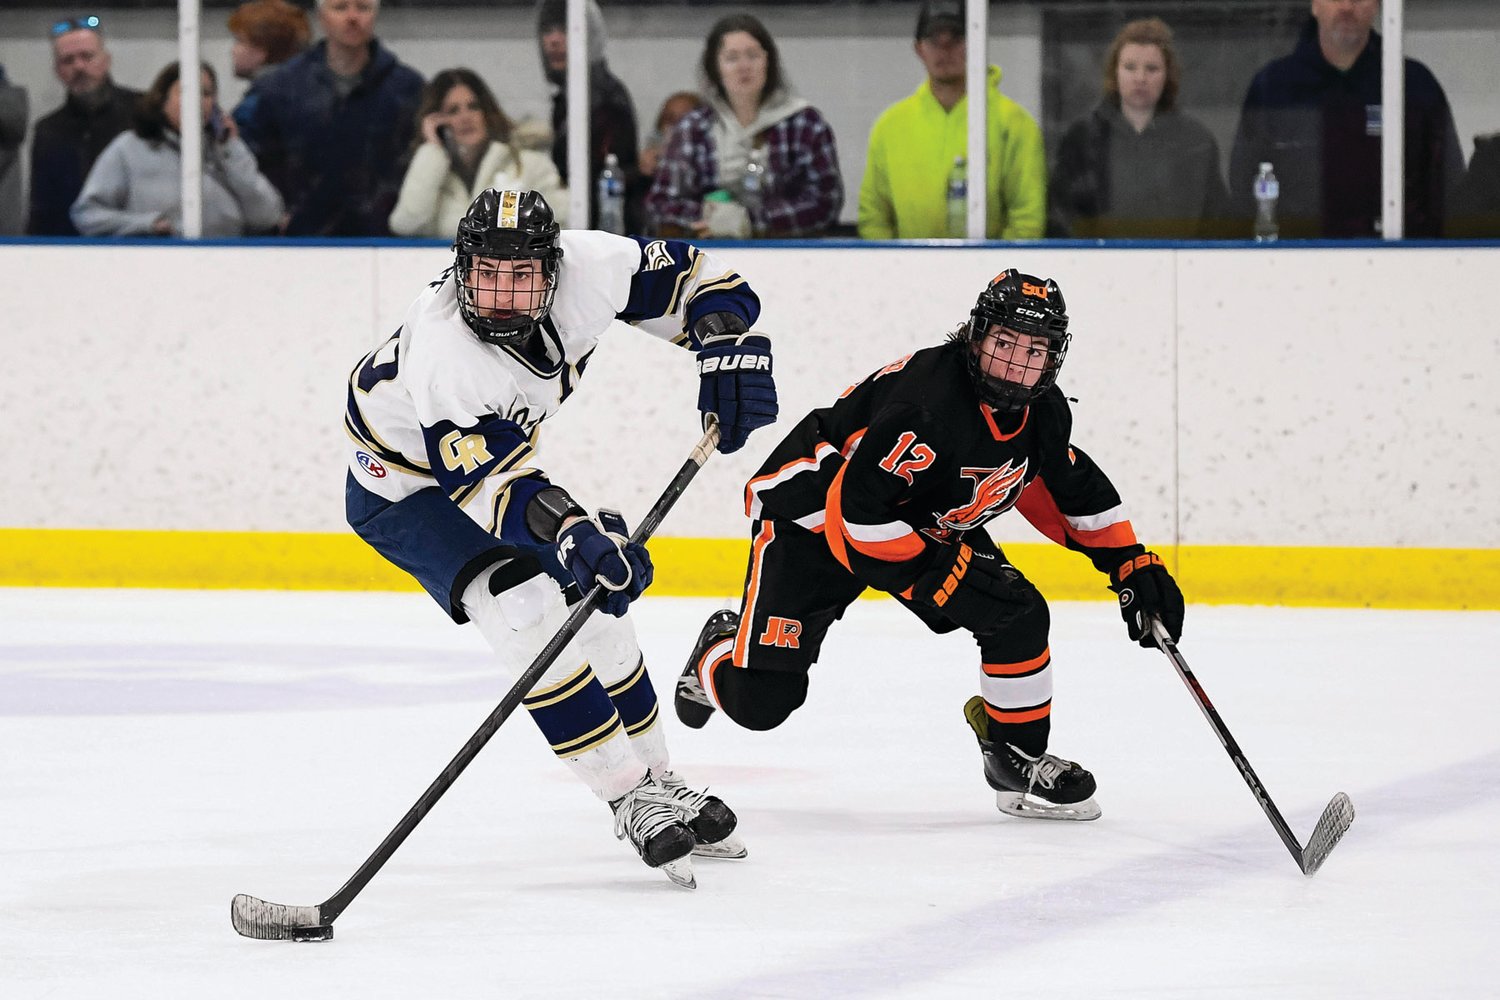 CR South’s Jeremy Rayher skates around Pennsbury’s Chris Sarver during the first period.